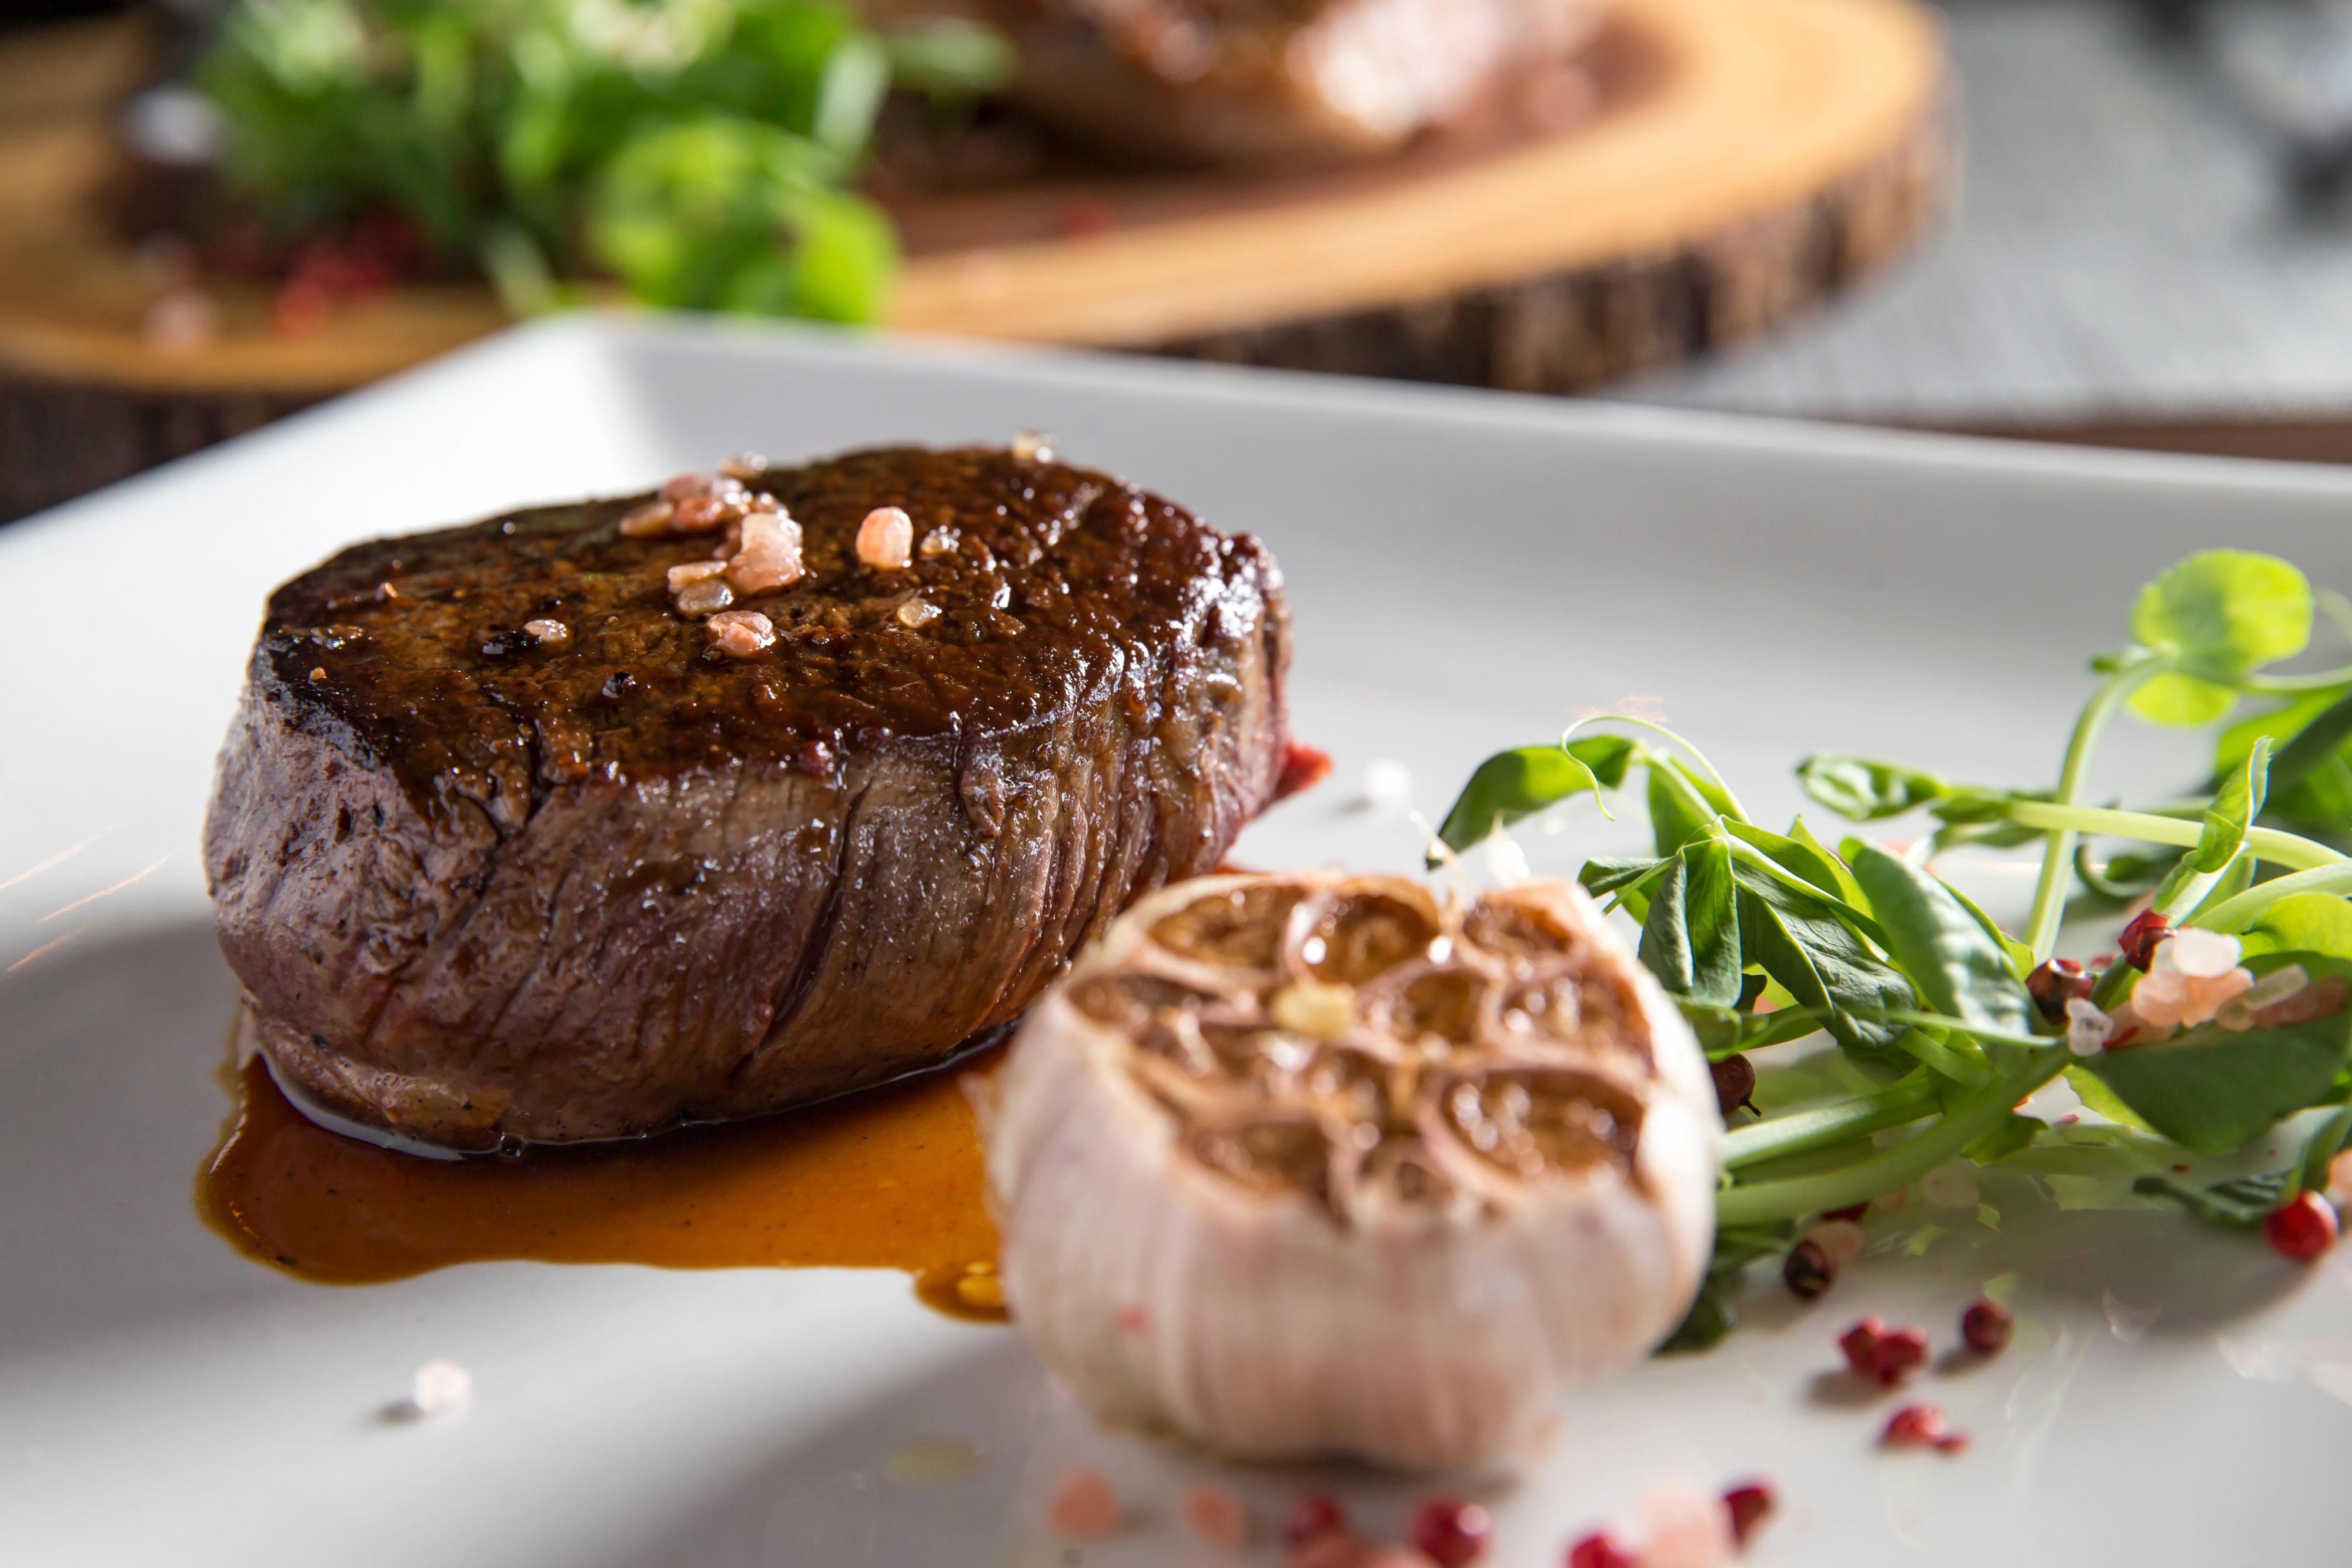 Visit to discover why Prime Steakhouse is the #1 rated Restaurant 